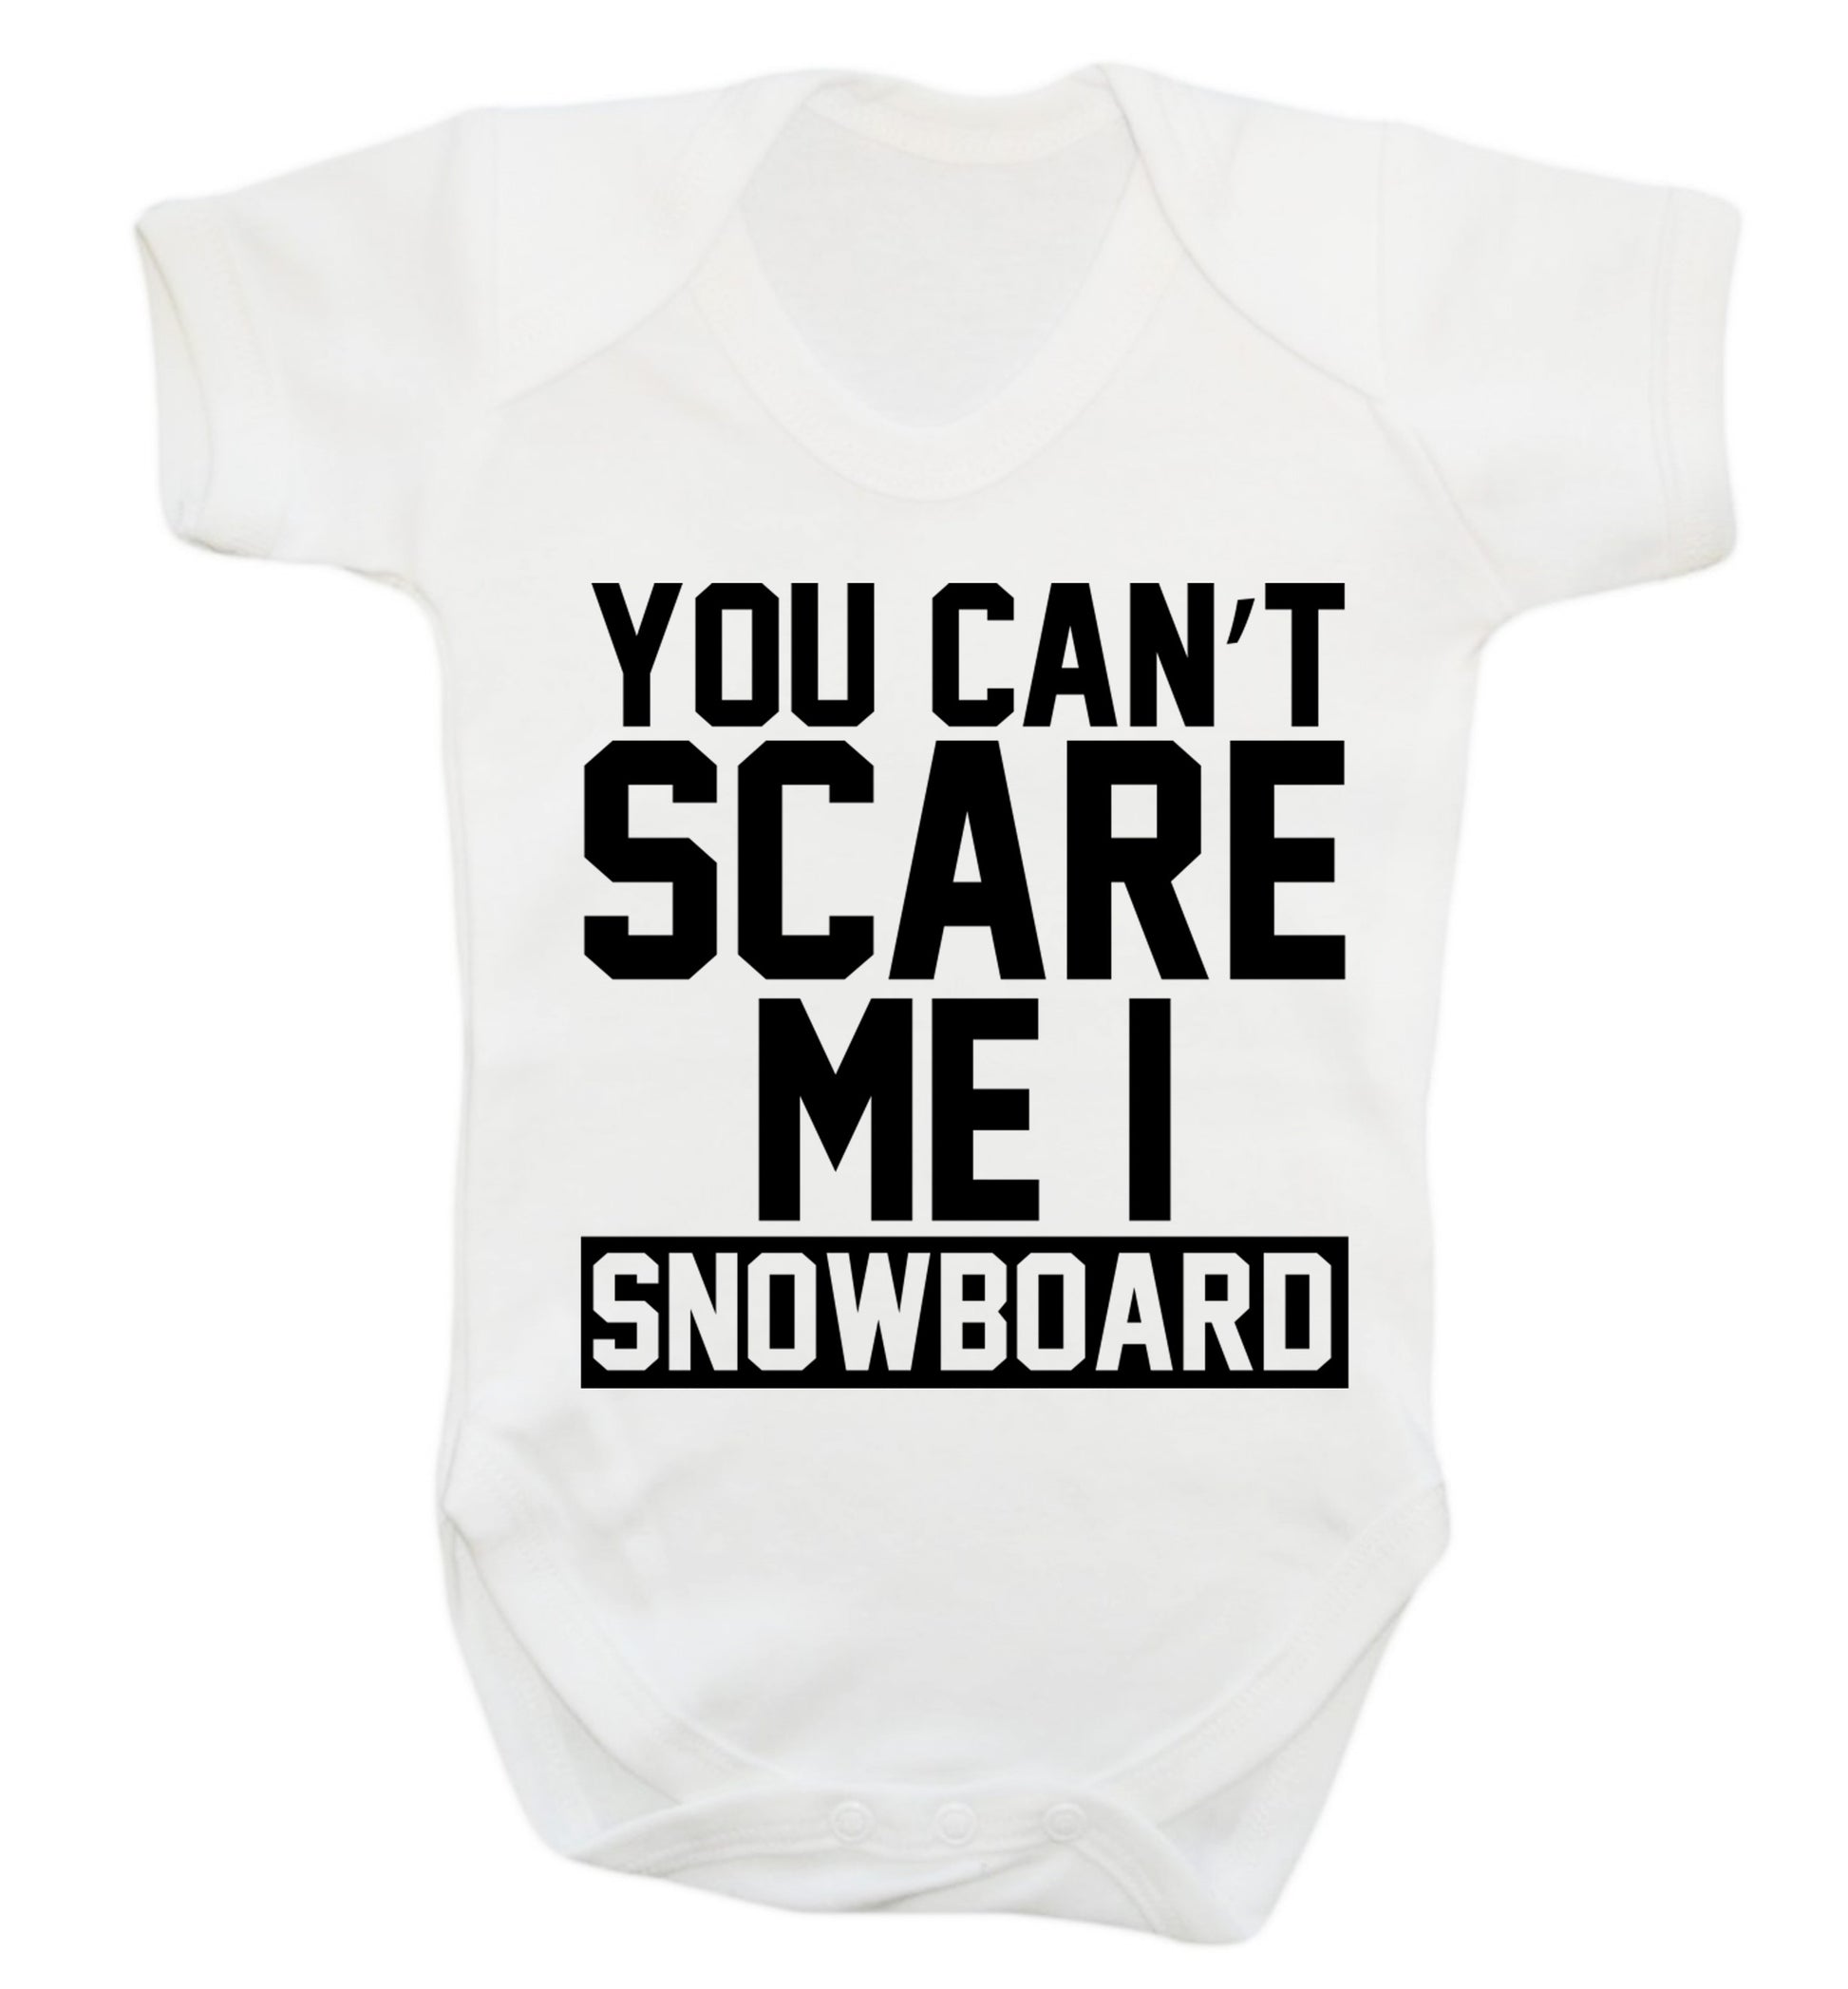 You can't scare me I snowboard Baby Vest white 18-24 months